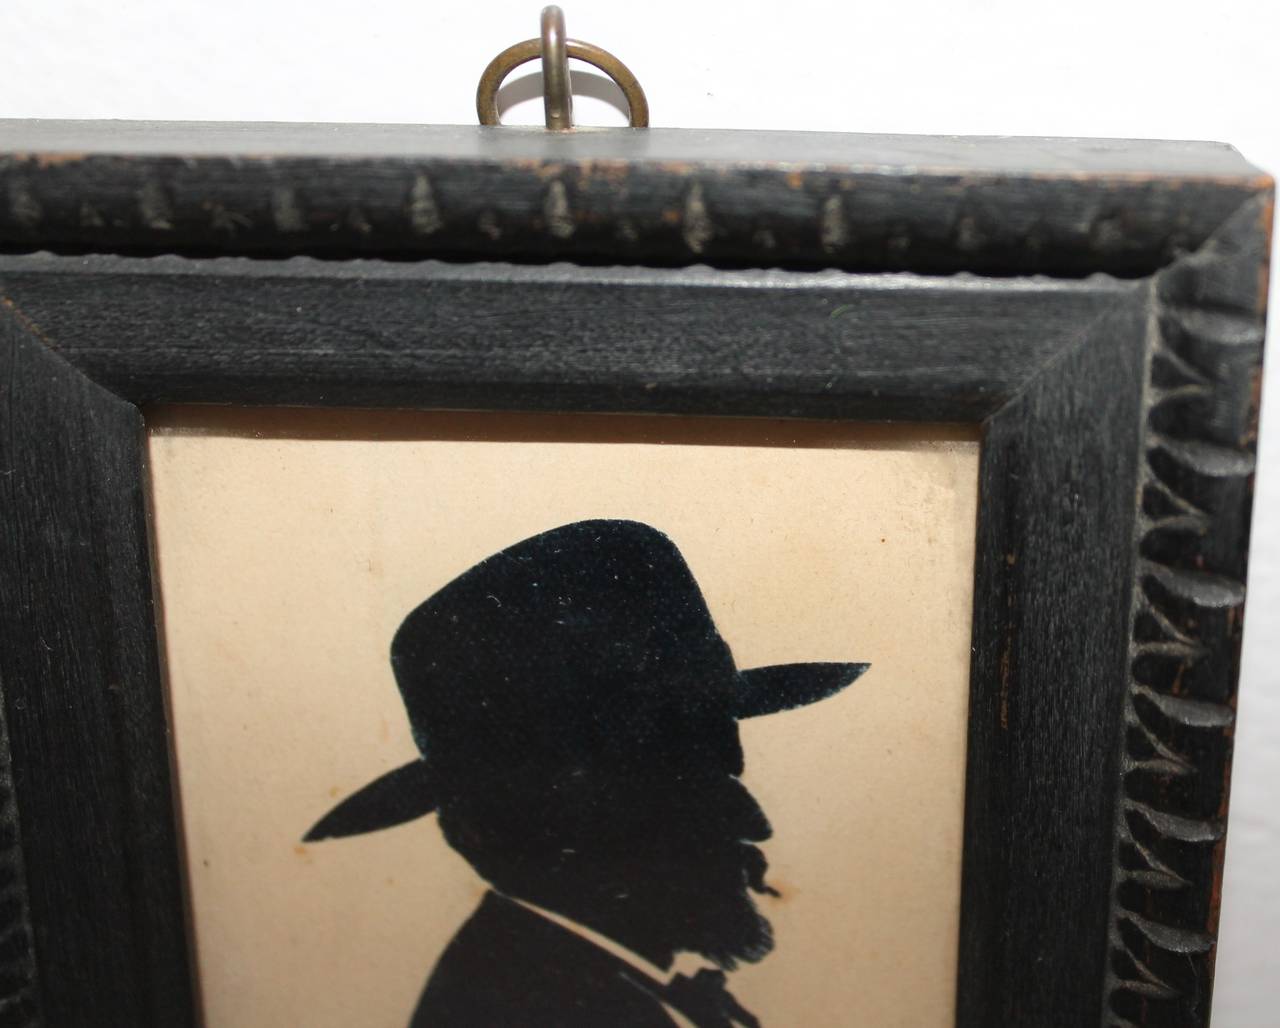 This Silhouette portrays the 19th century colonial gentleman plantation owner. This item has been well taken care of and has minor wear consistent with its age. This item is signed on the back portion. The frame appears to be original with the piece.